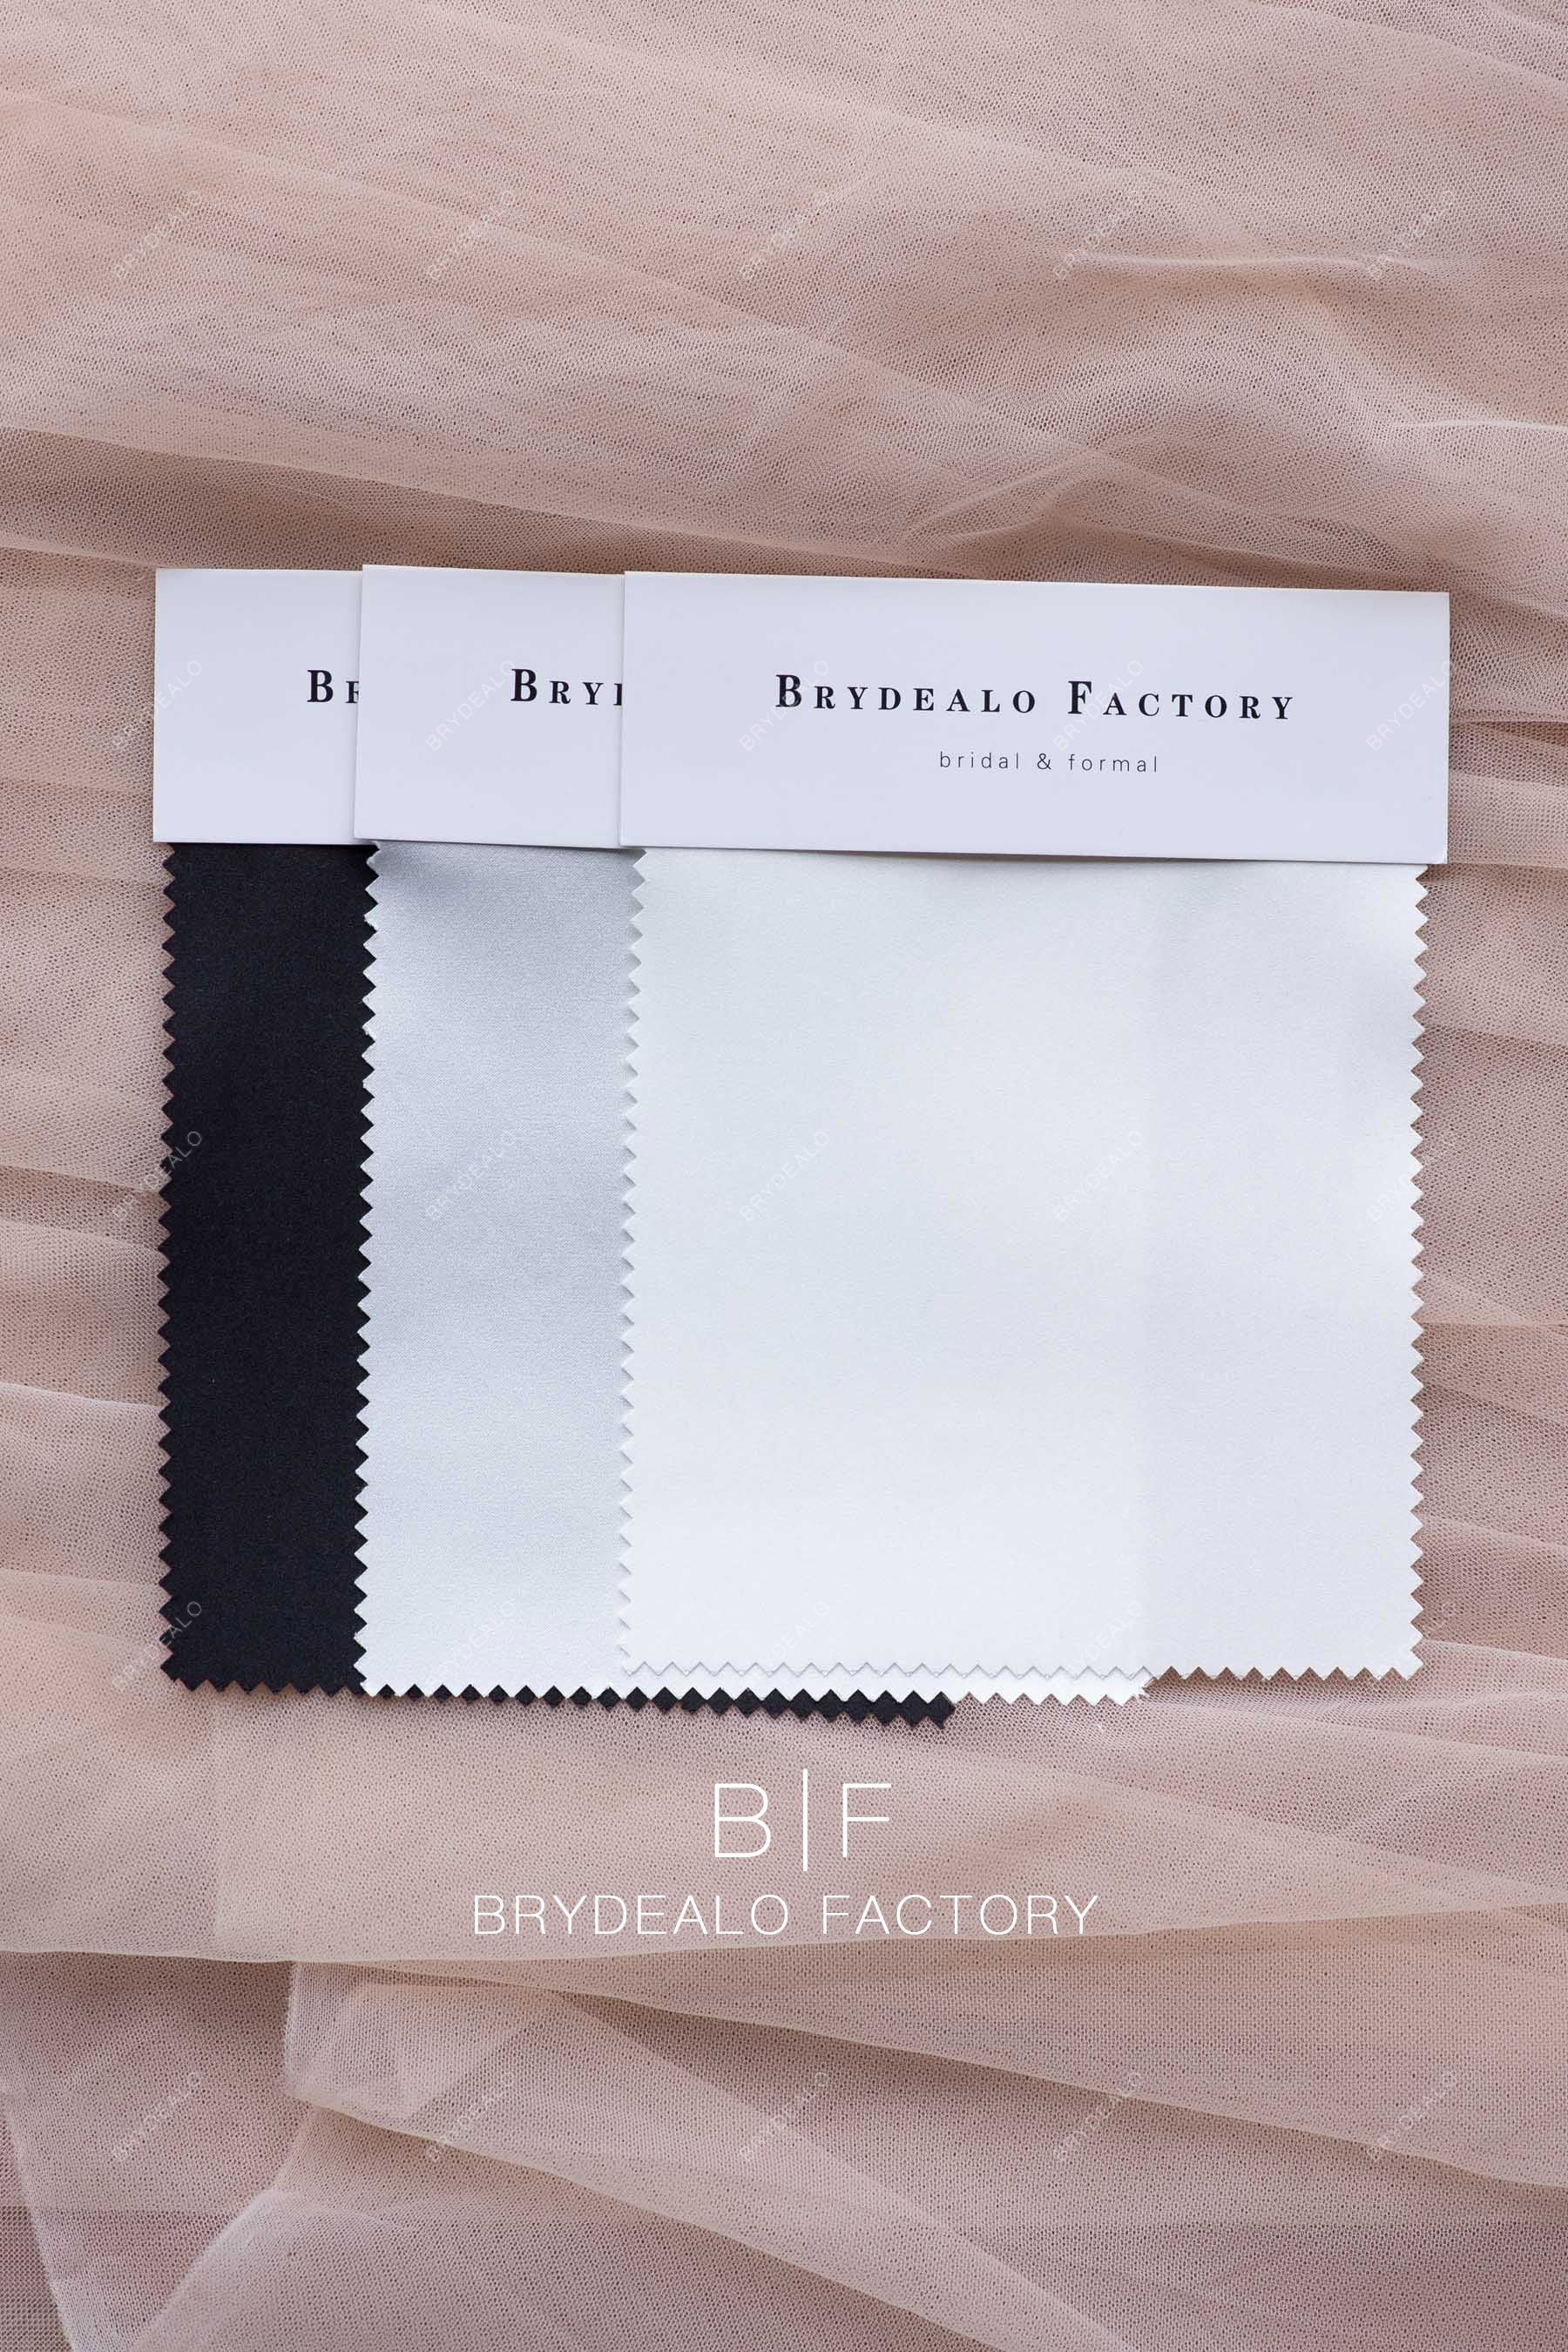 high-end sheen bridal satin fabric swatches